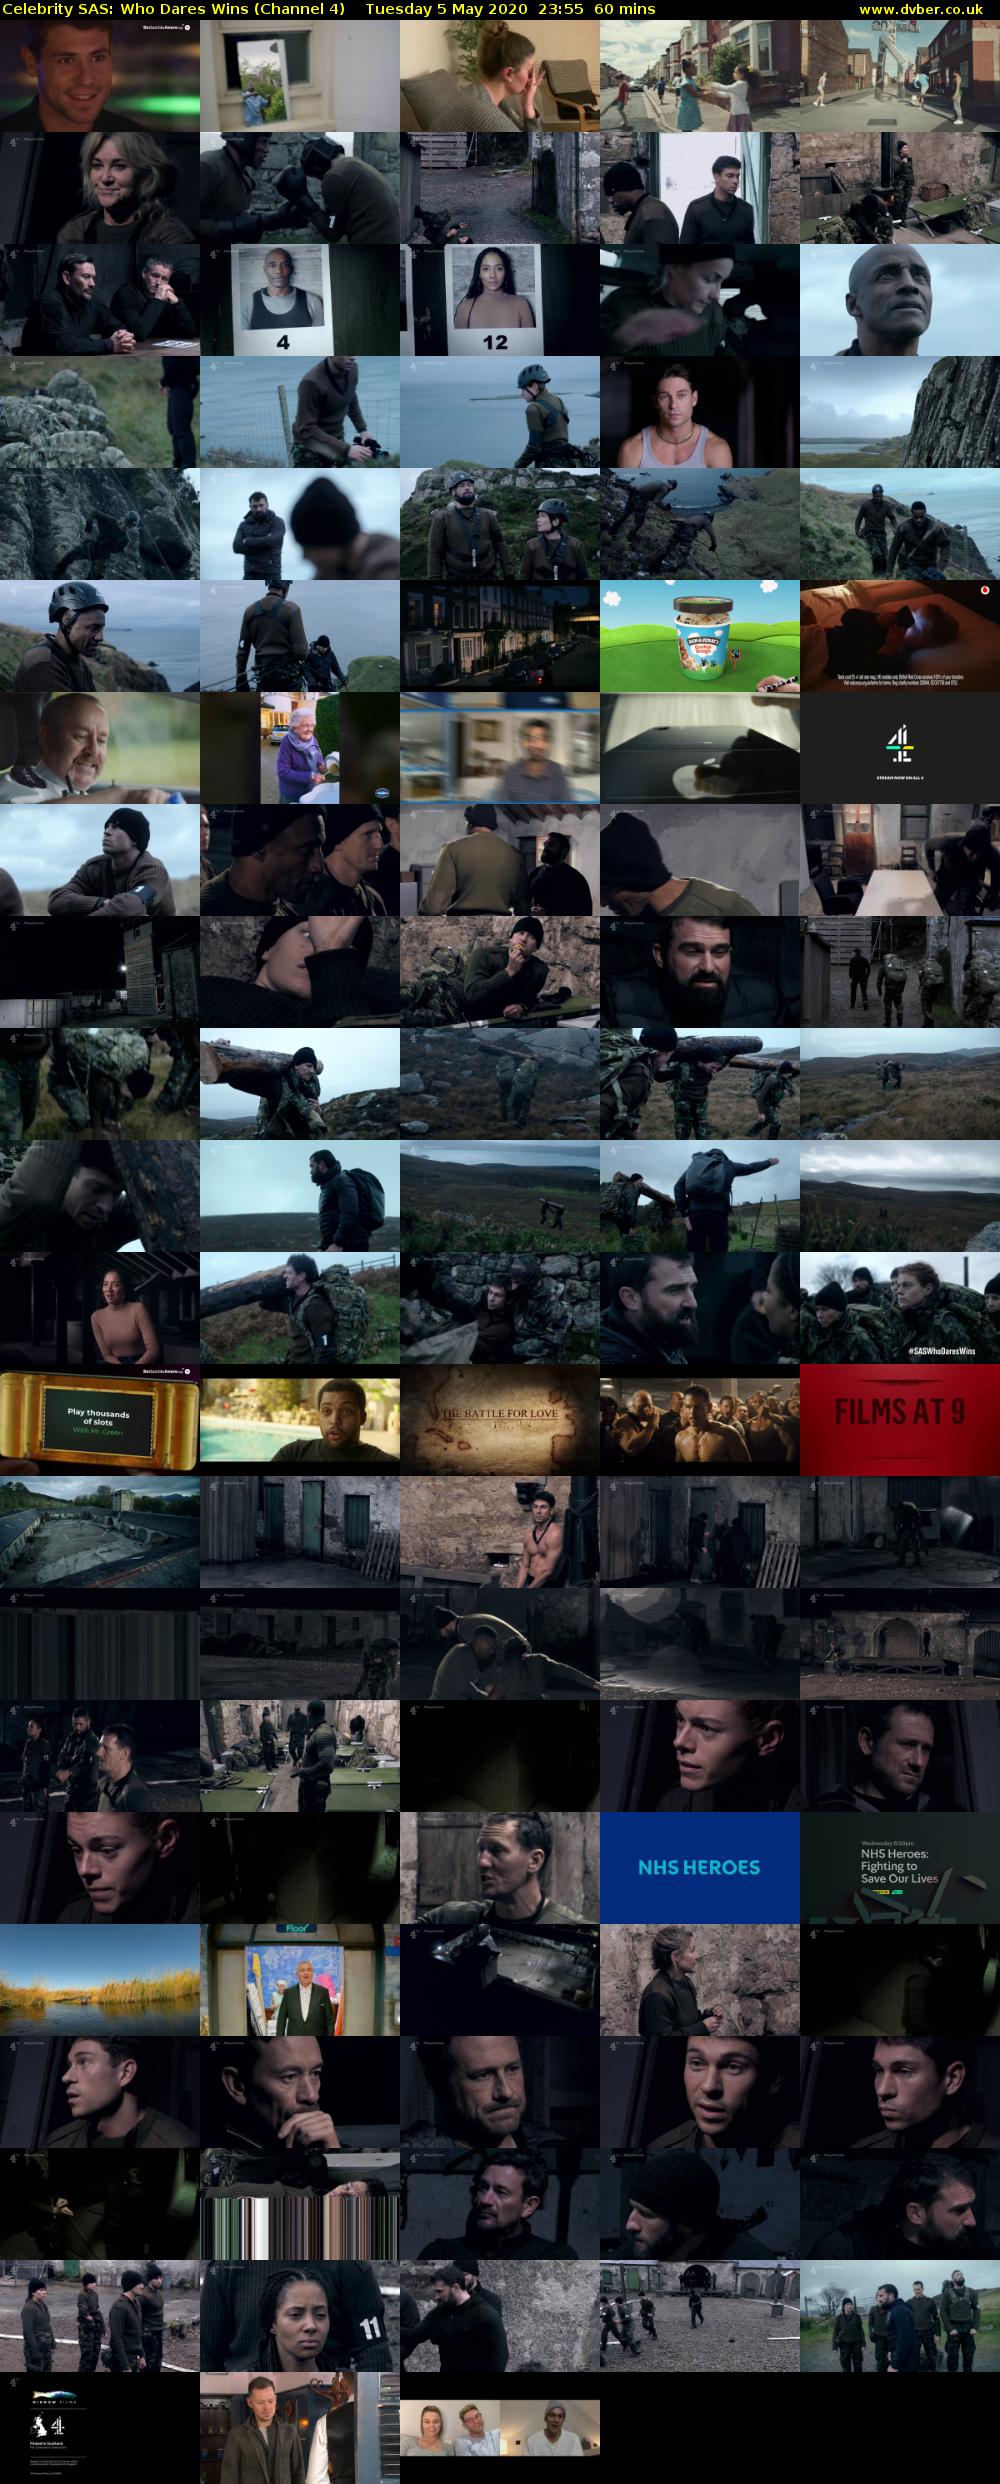 Celebrity SAS: Who Dares Wins (Channel 4) Tuesday 5 May 2020 23:55 - 00:55